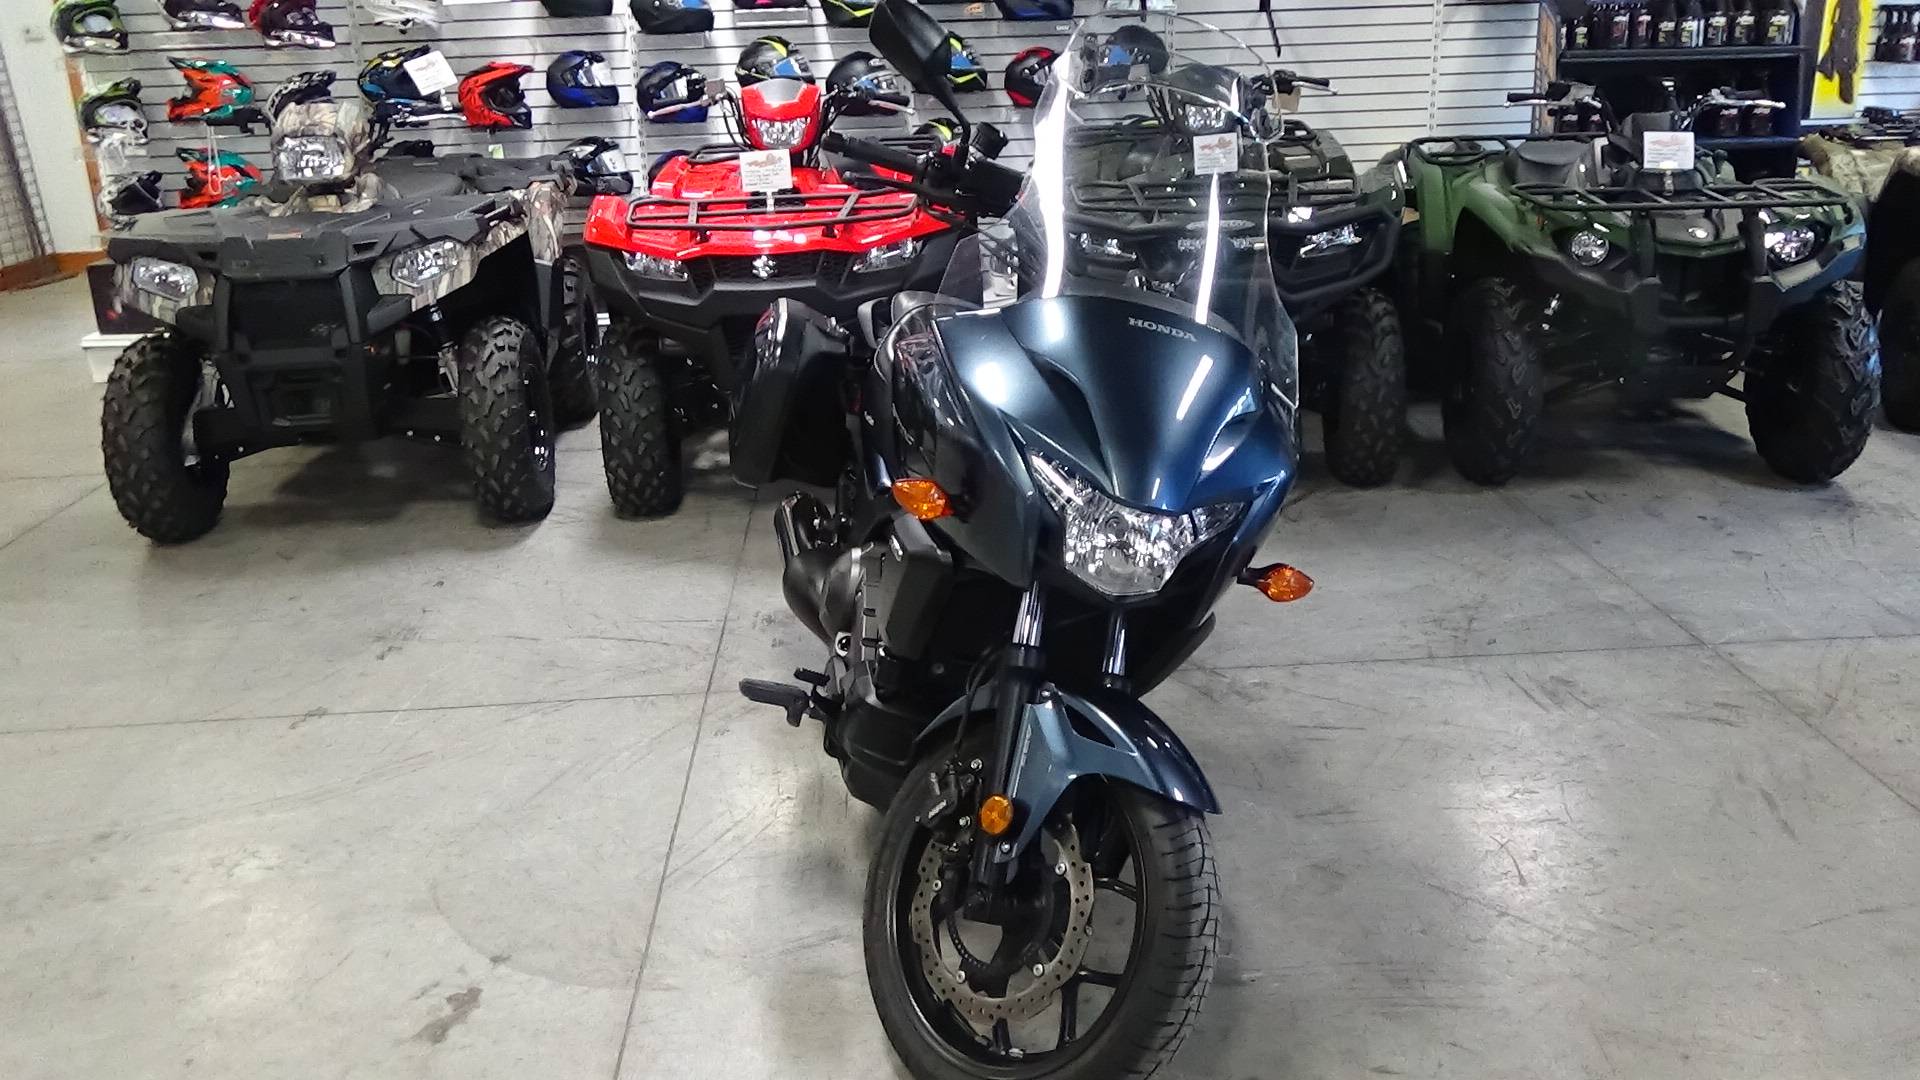 Used 15 Honda Ctx 700 Dct Abs Motorcycles In Adams Ma Stock Number